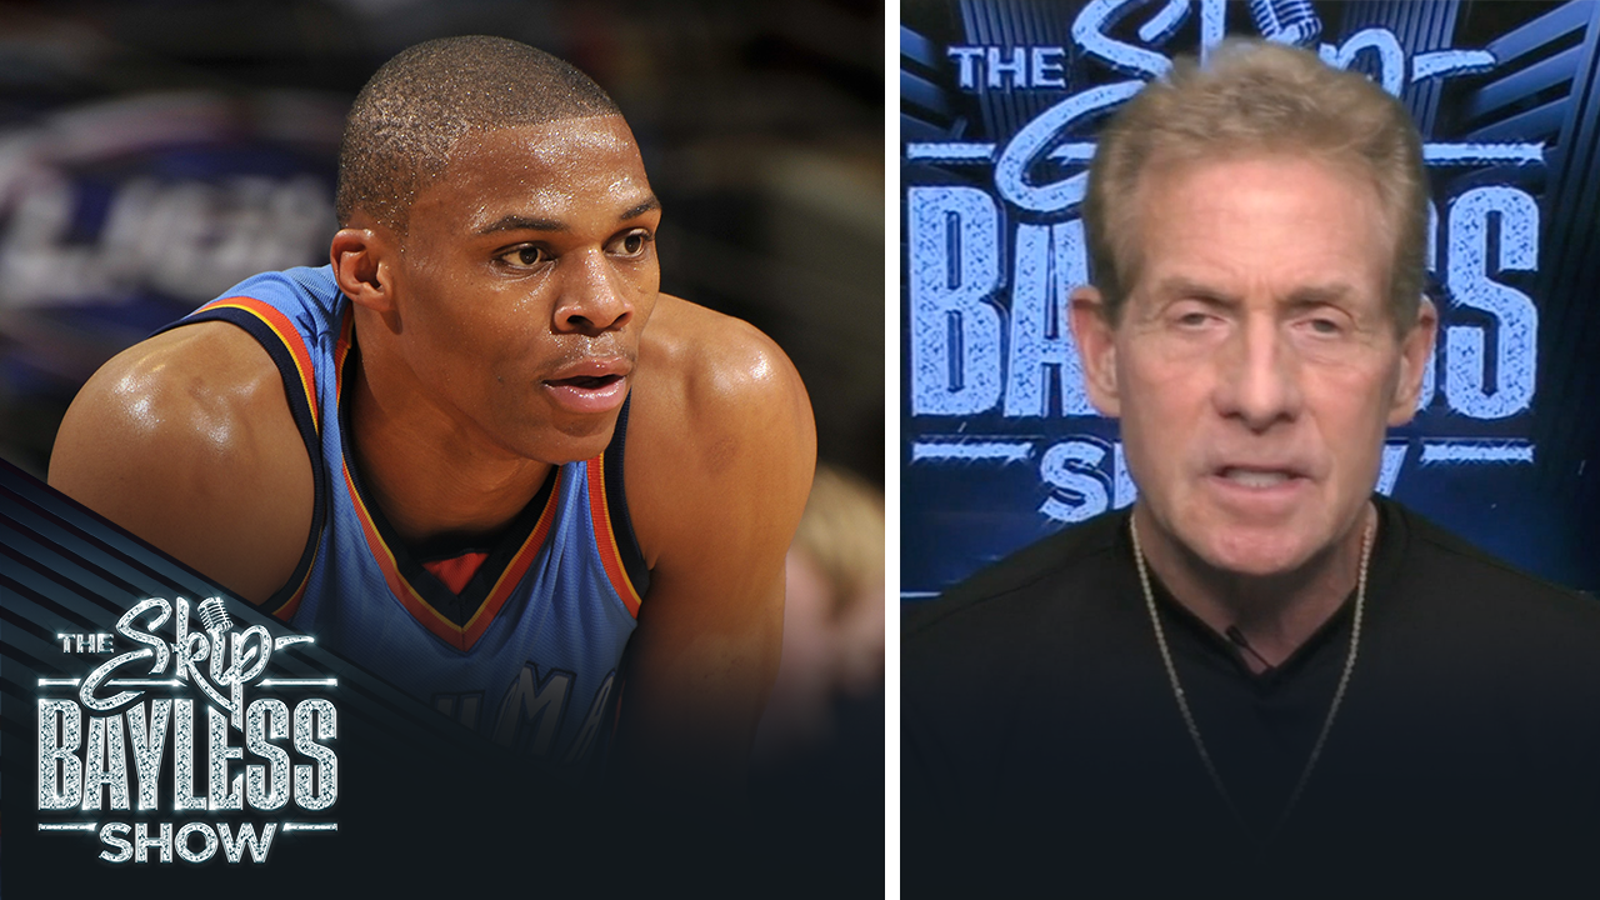 Skip Bayless needed a bodyguard in OKC after criticizing Westbrook